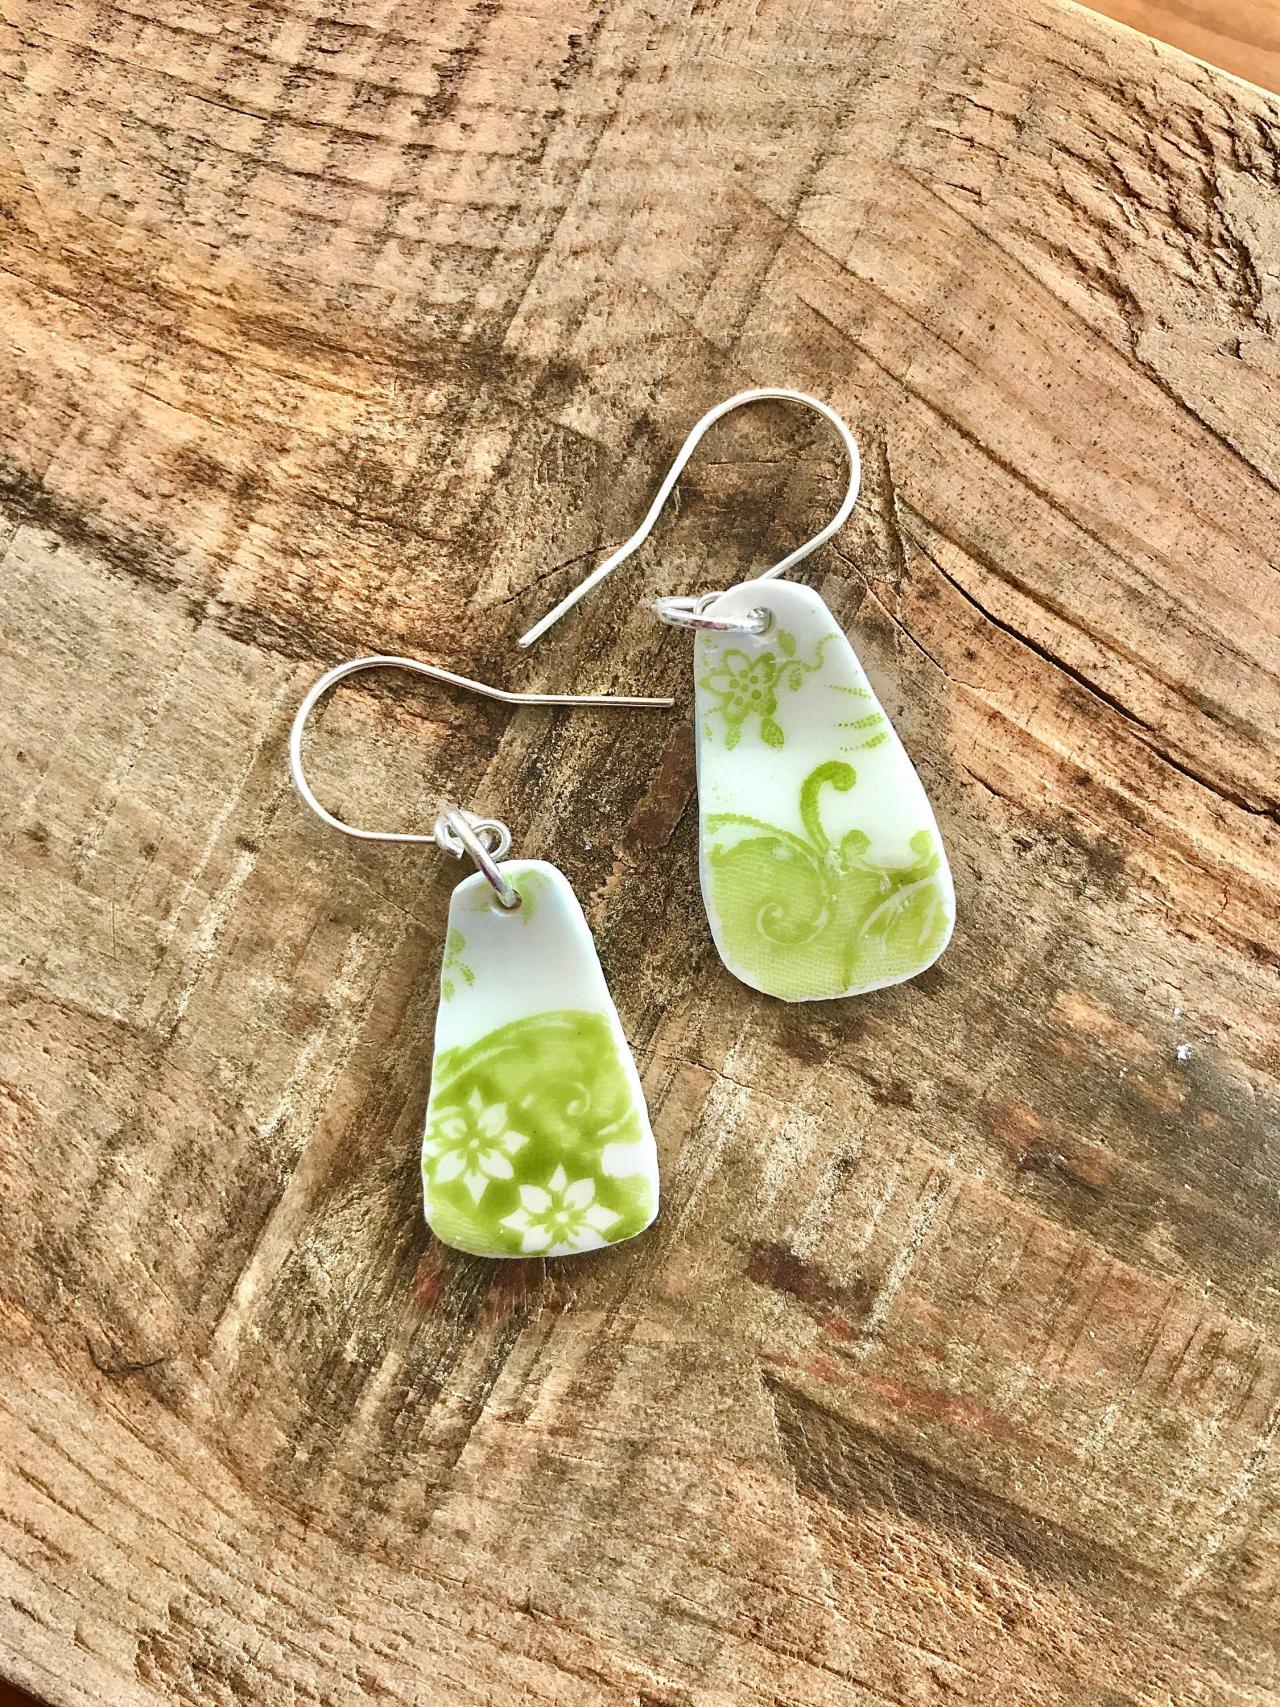 Gorgeous green floral vintage recycled broken China earrings with sterling silver wires.